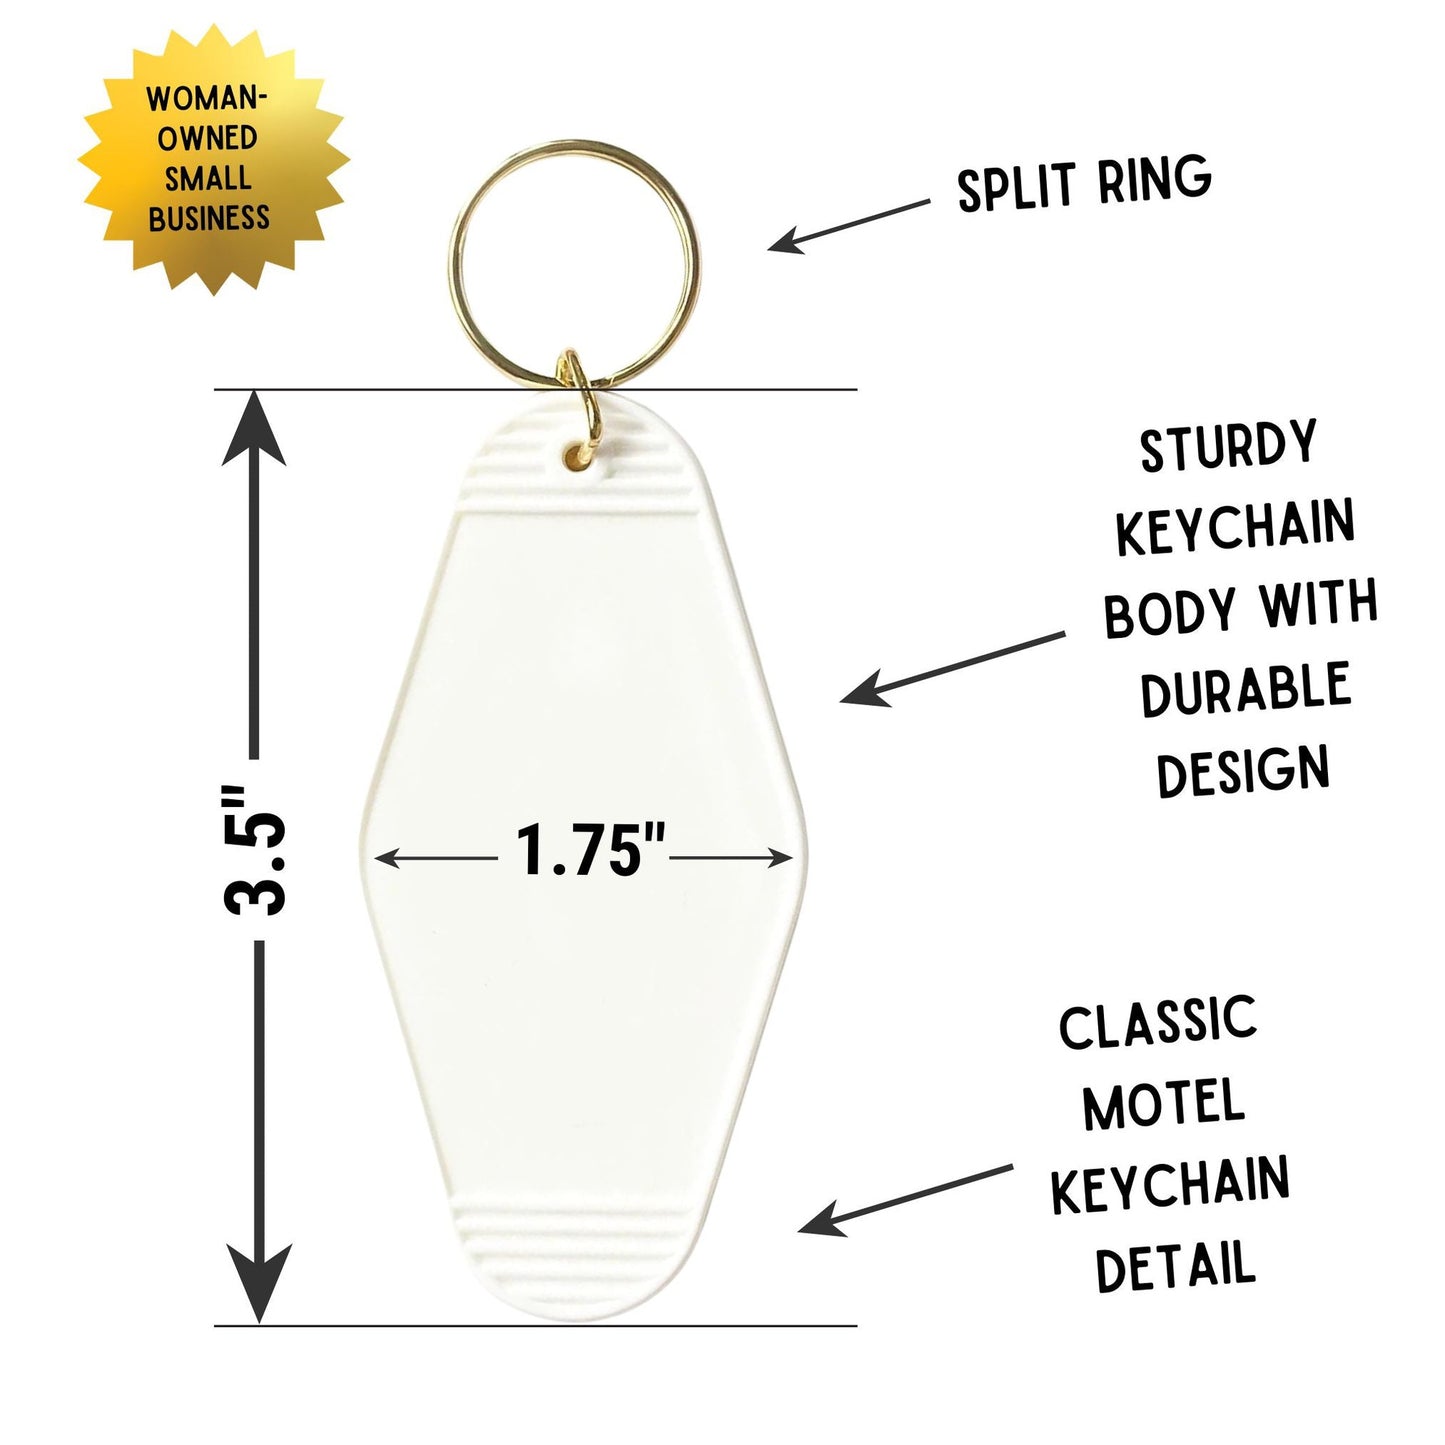 Fuck Yes You Glorious Bitch Motel Style Keychain in White